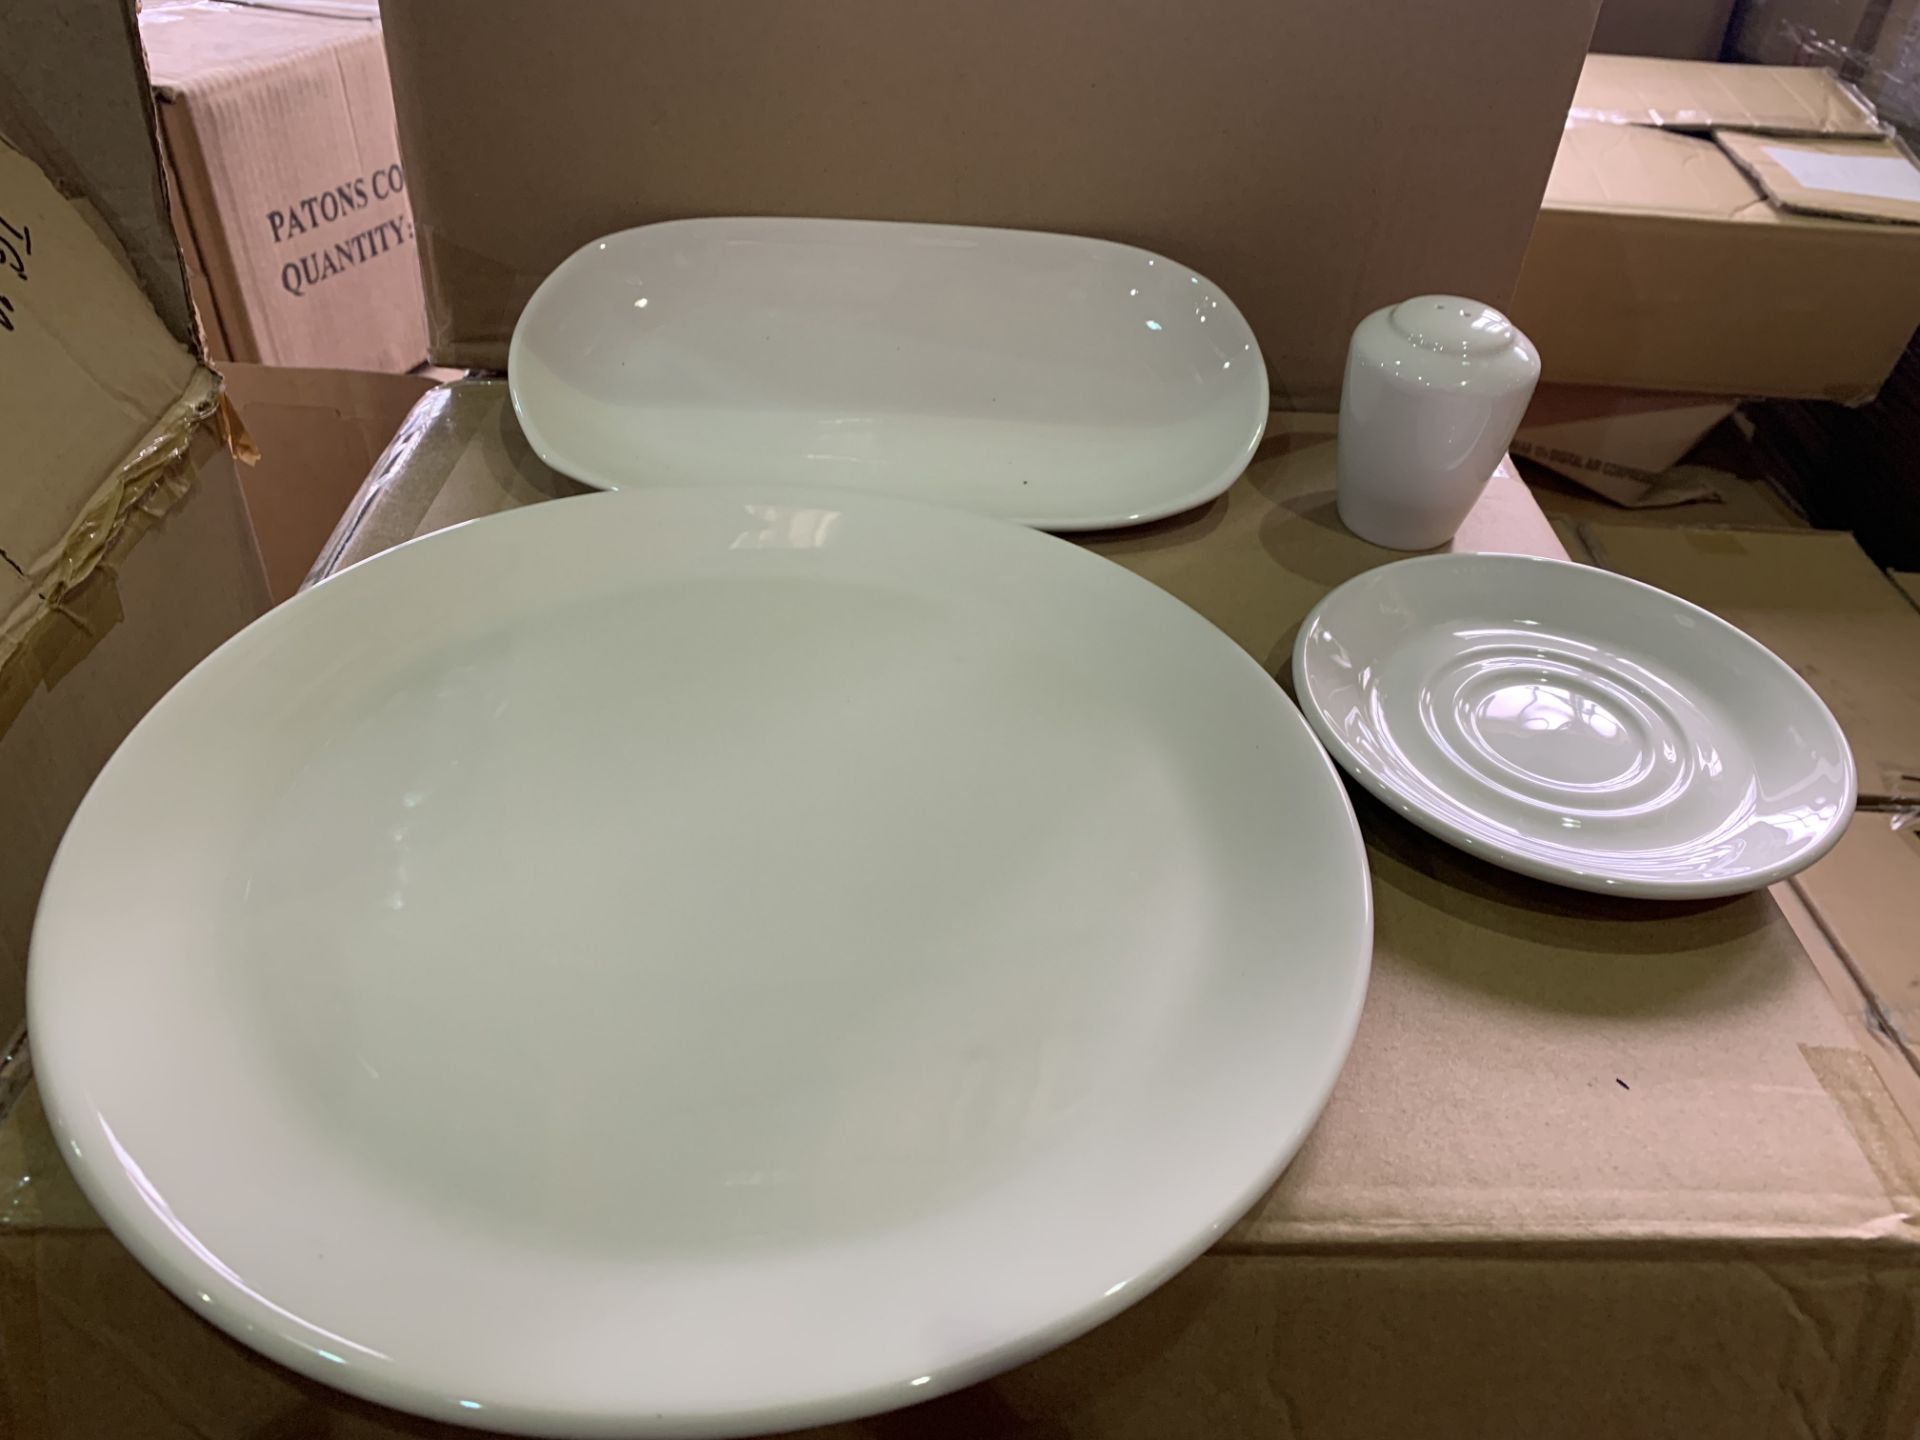 MIXED STEELITE CROCKERY LOT INCLUDING 3 X PACKS OF SIMPLICITY WHITE SAUCERS, 2 X PACKS OF 6 WHITE